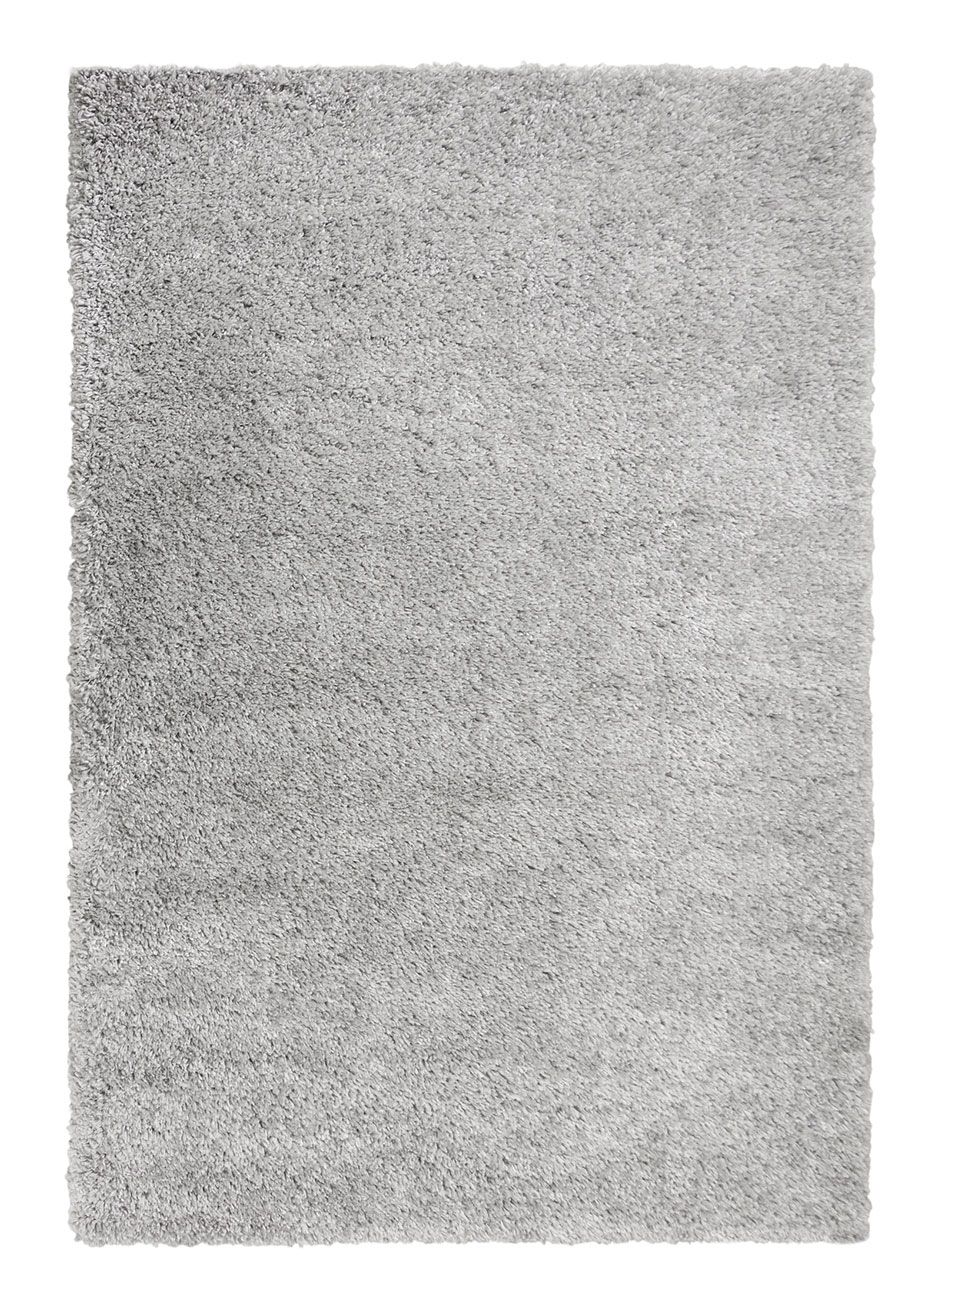 Brilliance Sparks Grey Thick Super Soft Shaggy Rug in various sizes 